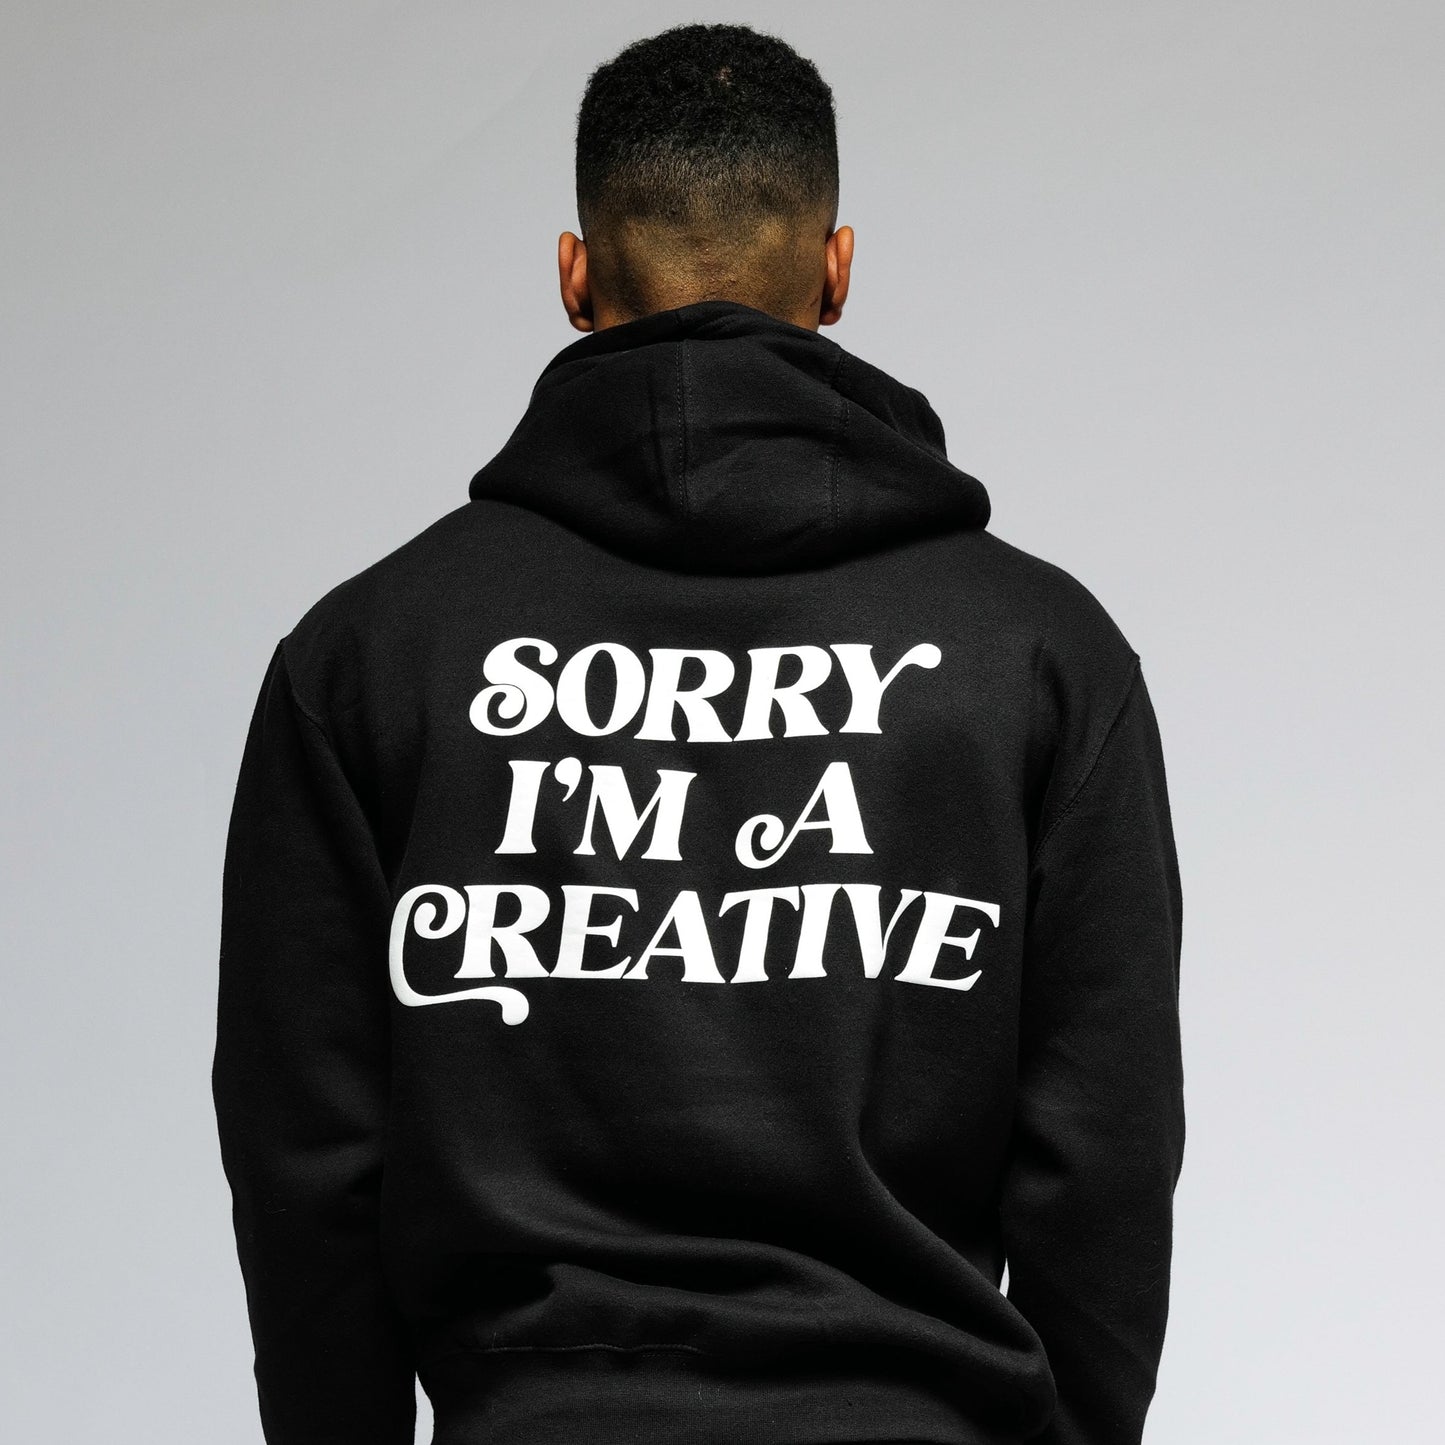 "Sorry I'm A Creative" Puff Print Hoodie (BLACK) - For The Crew Clothing